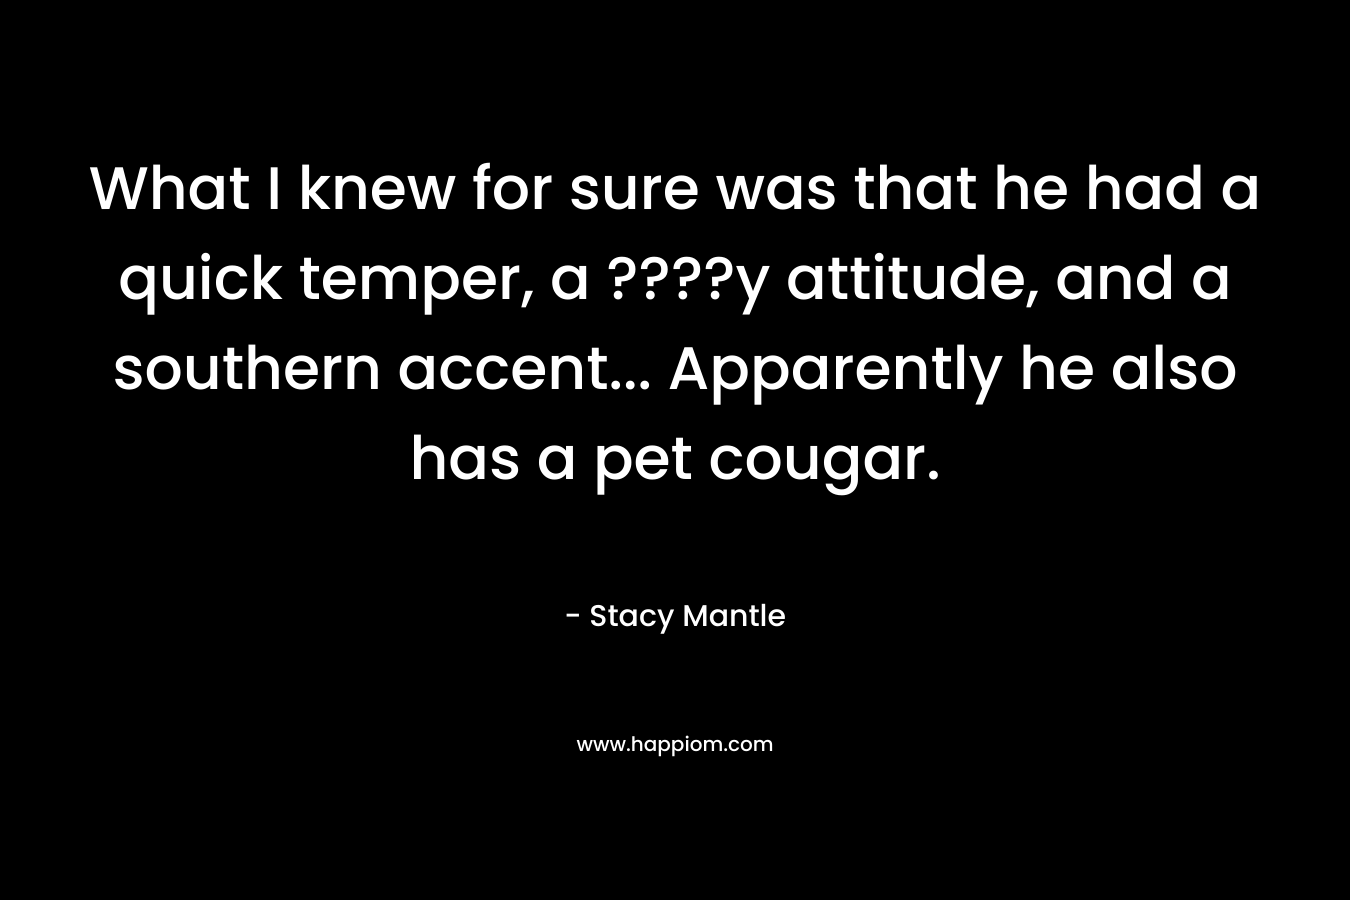 What I knew for sure was that he had a quick temper, a ????y attitude, and a southern accent... Apparently he also has a pet cougar.